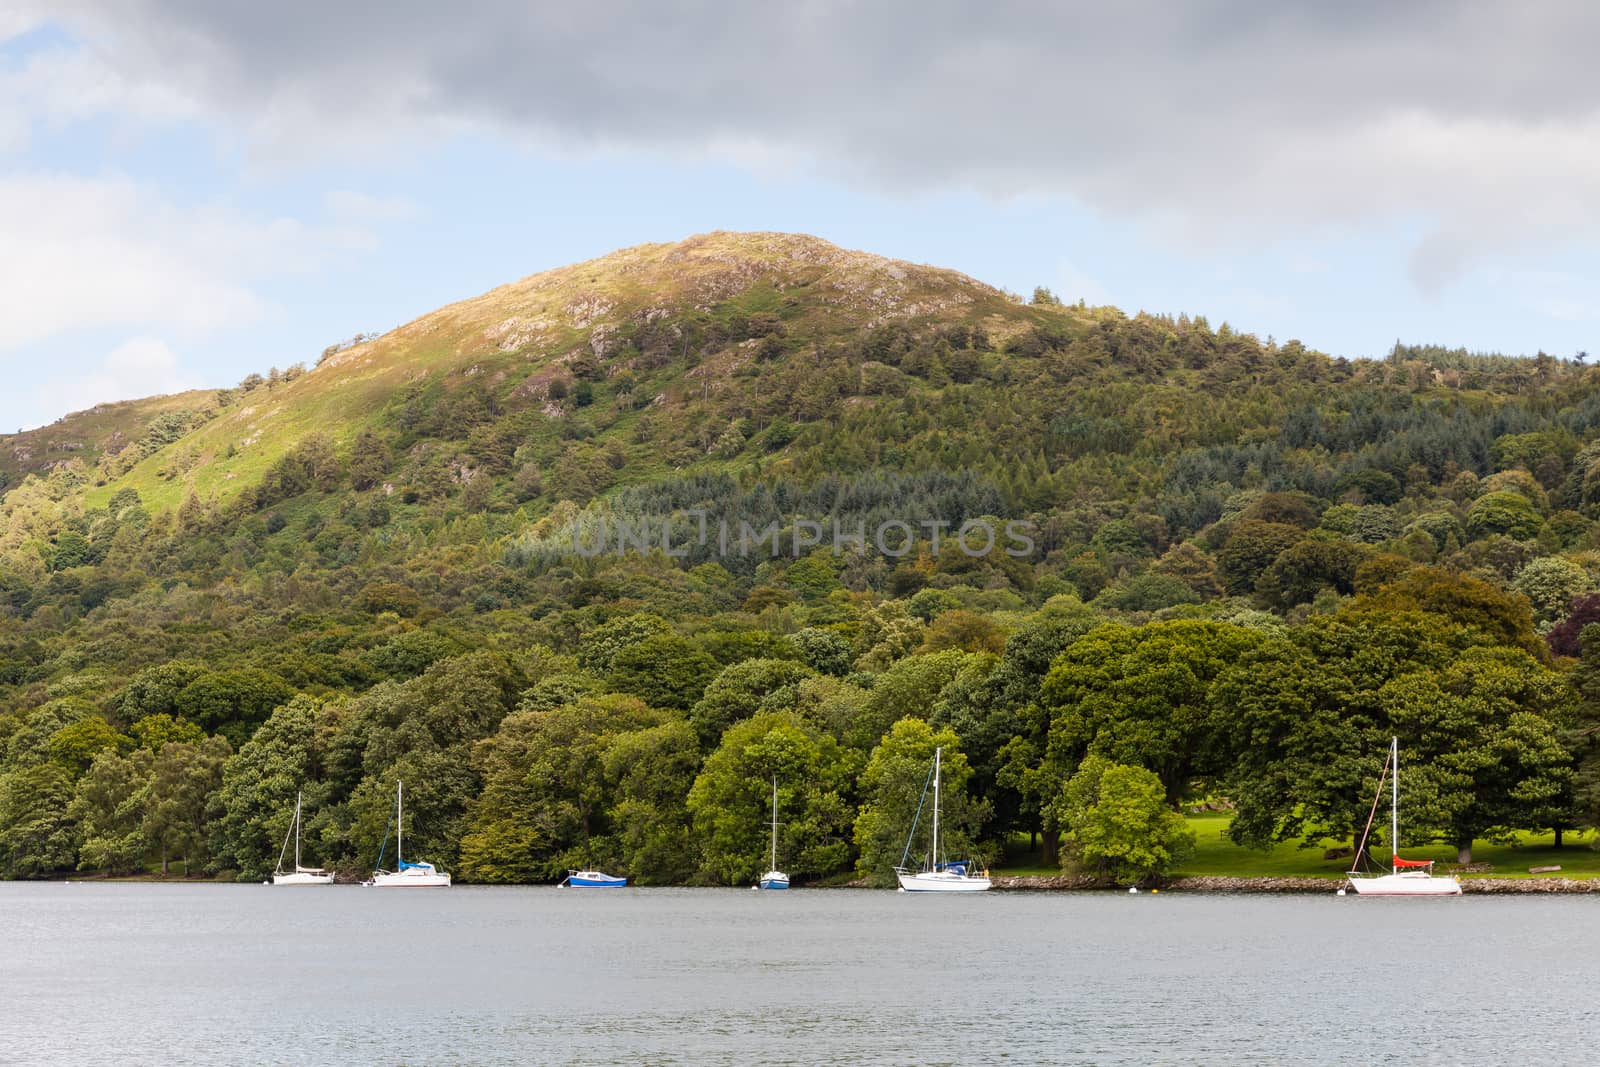 The view across Lake Windermere from Lakeside, Cumbria in the English Lake District National Park.